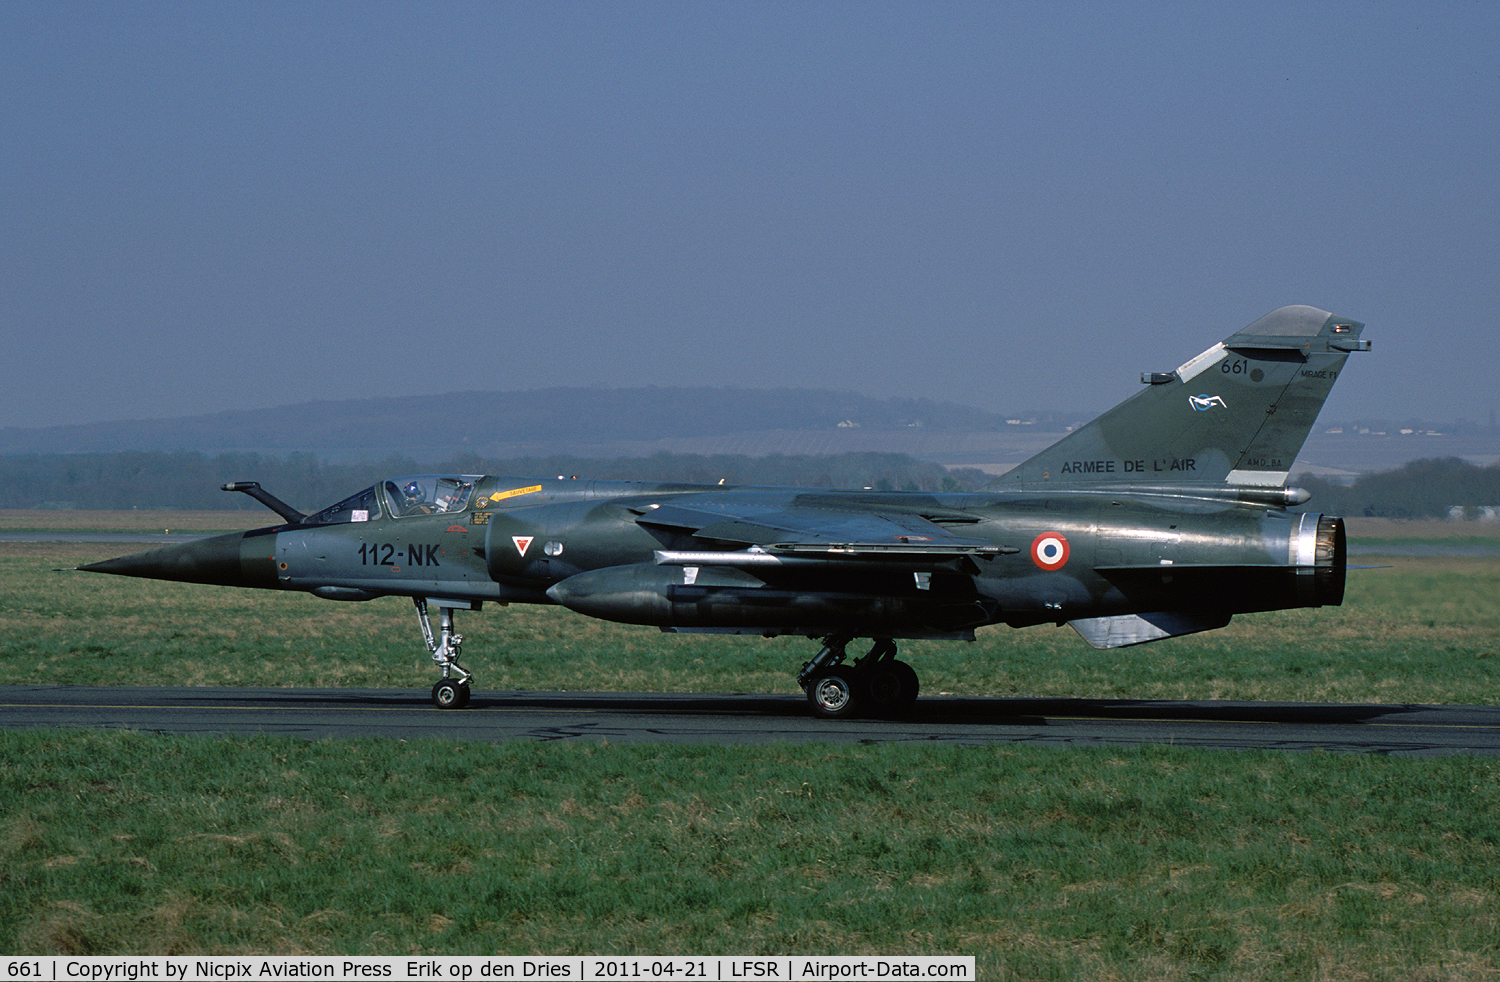 661, Dassault Mirage F.1CR C/N 661, Mirage F-1CR 661 returning to its' parking spot at Reims-Champagne AB.